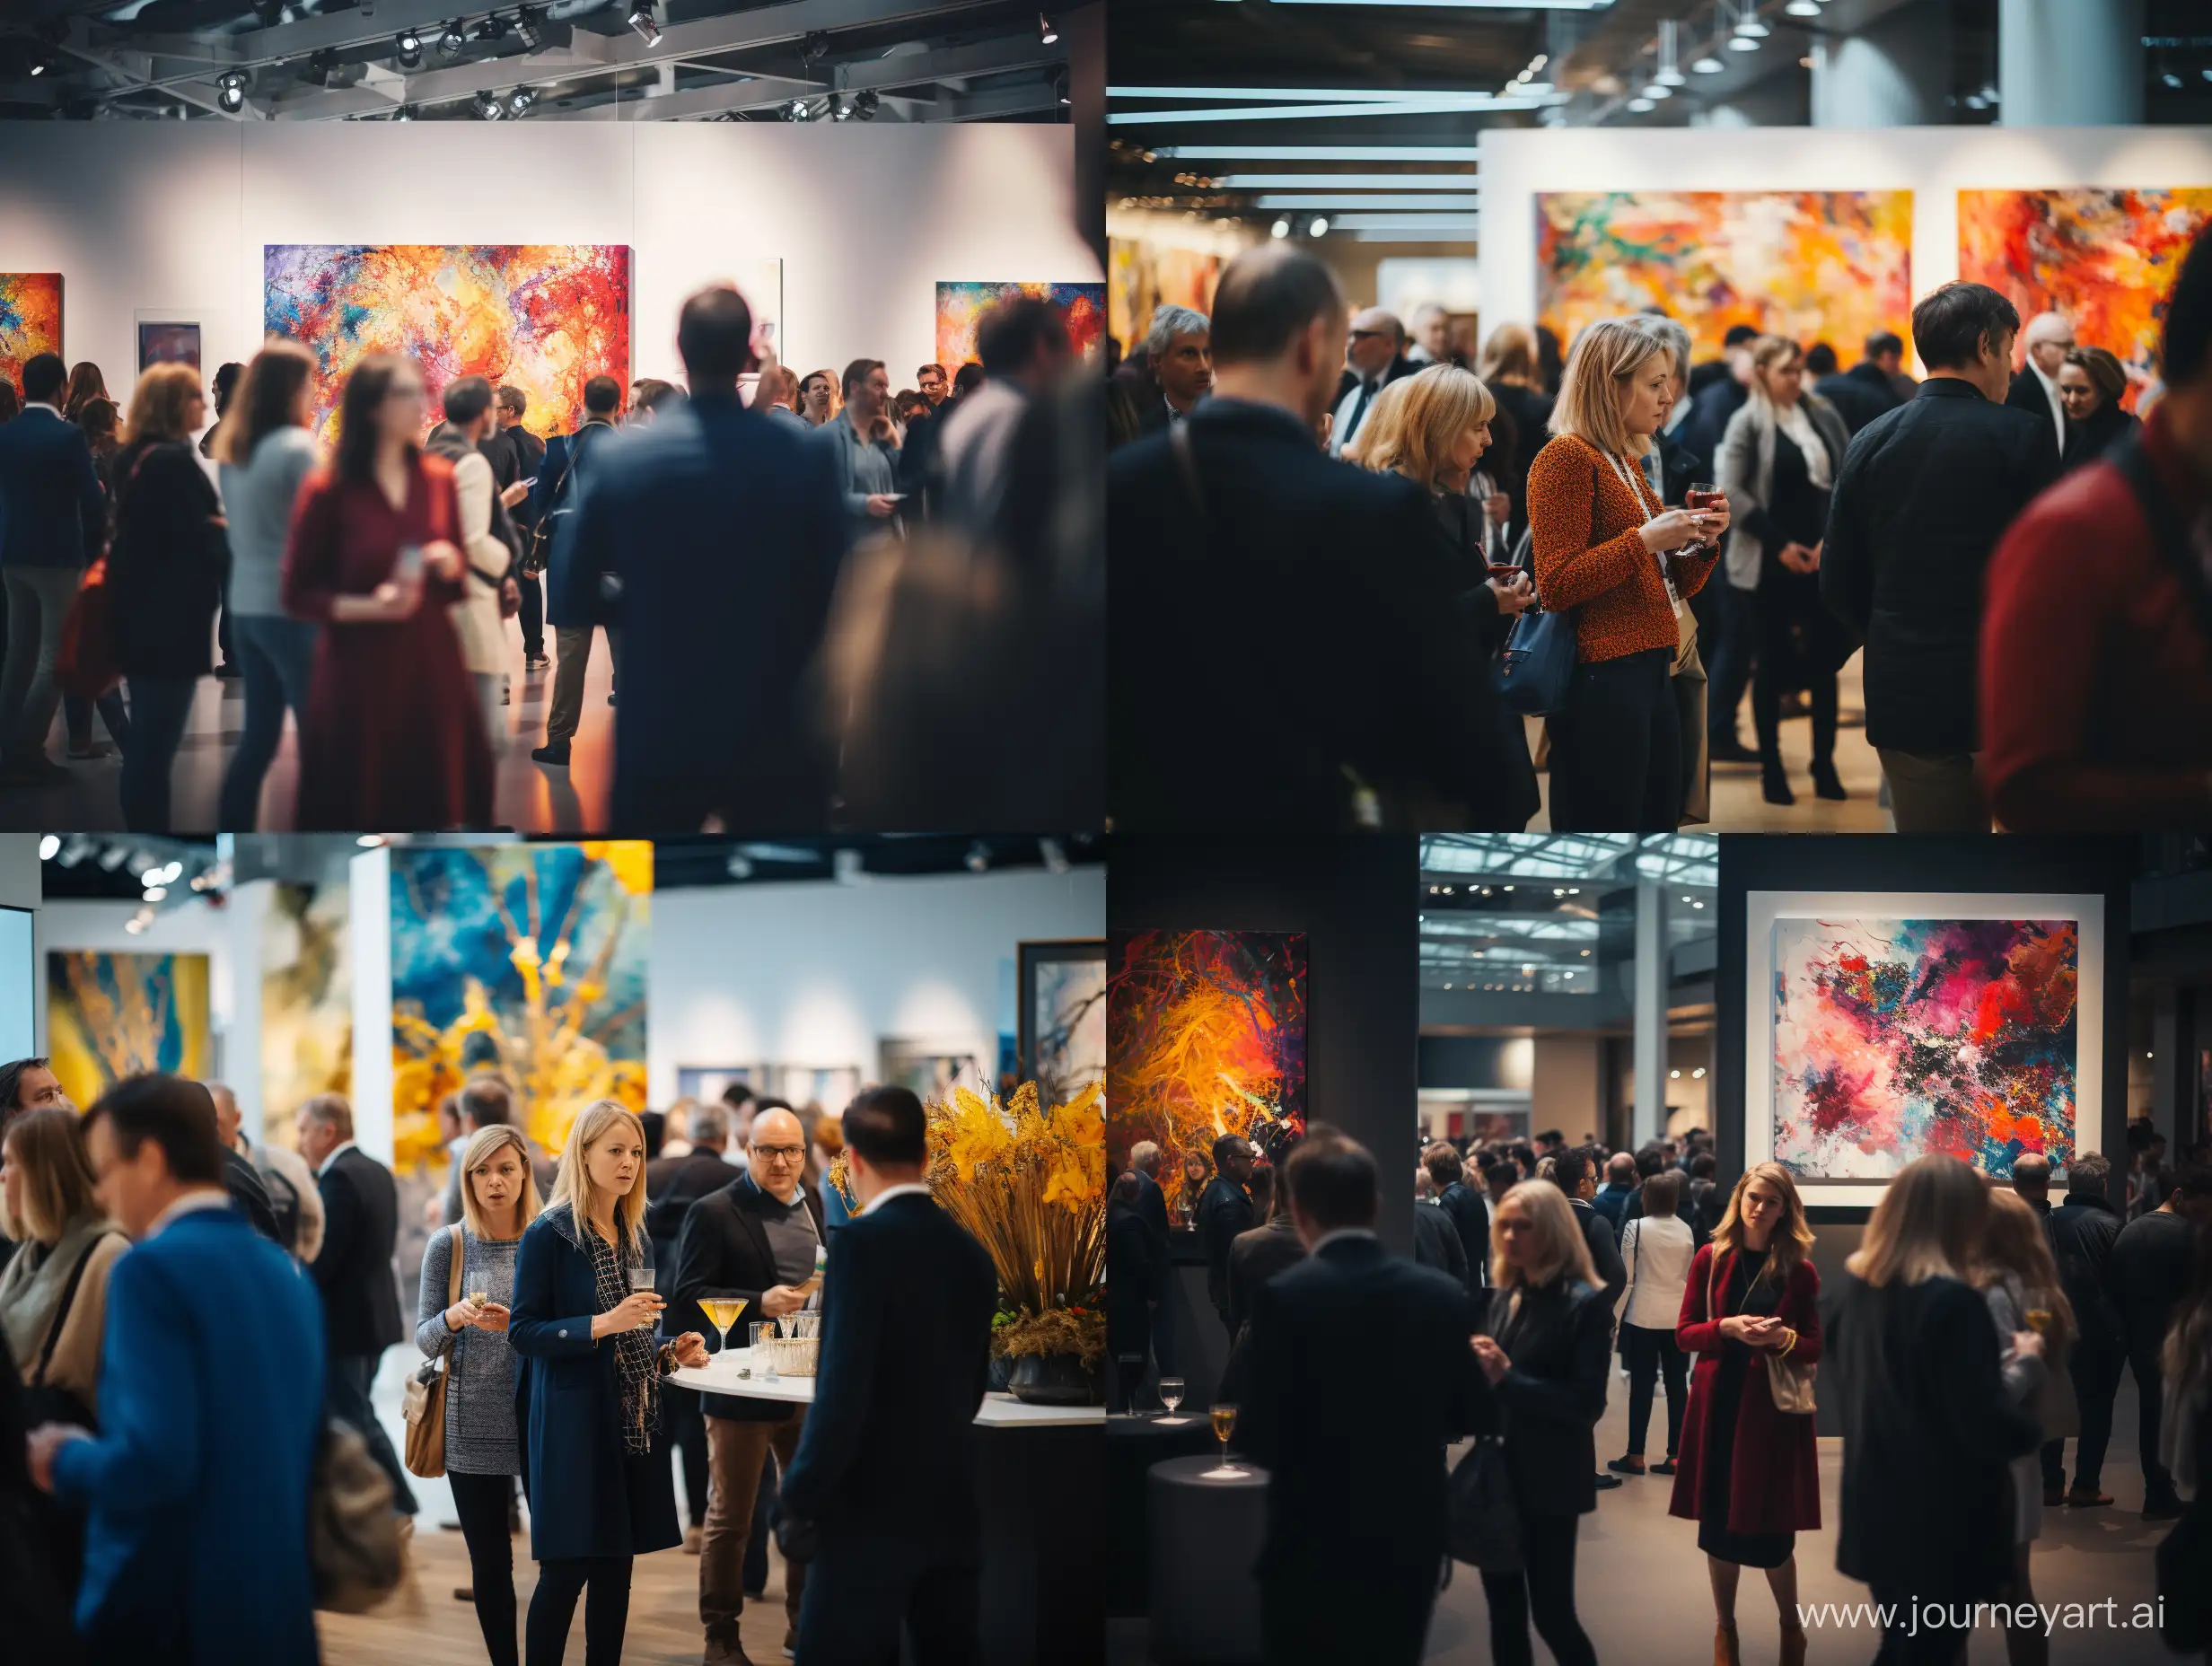 Vibrant-Exhibition-Event-with-Blurred-Crowd